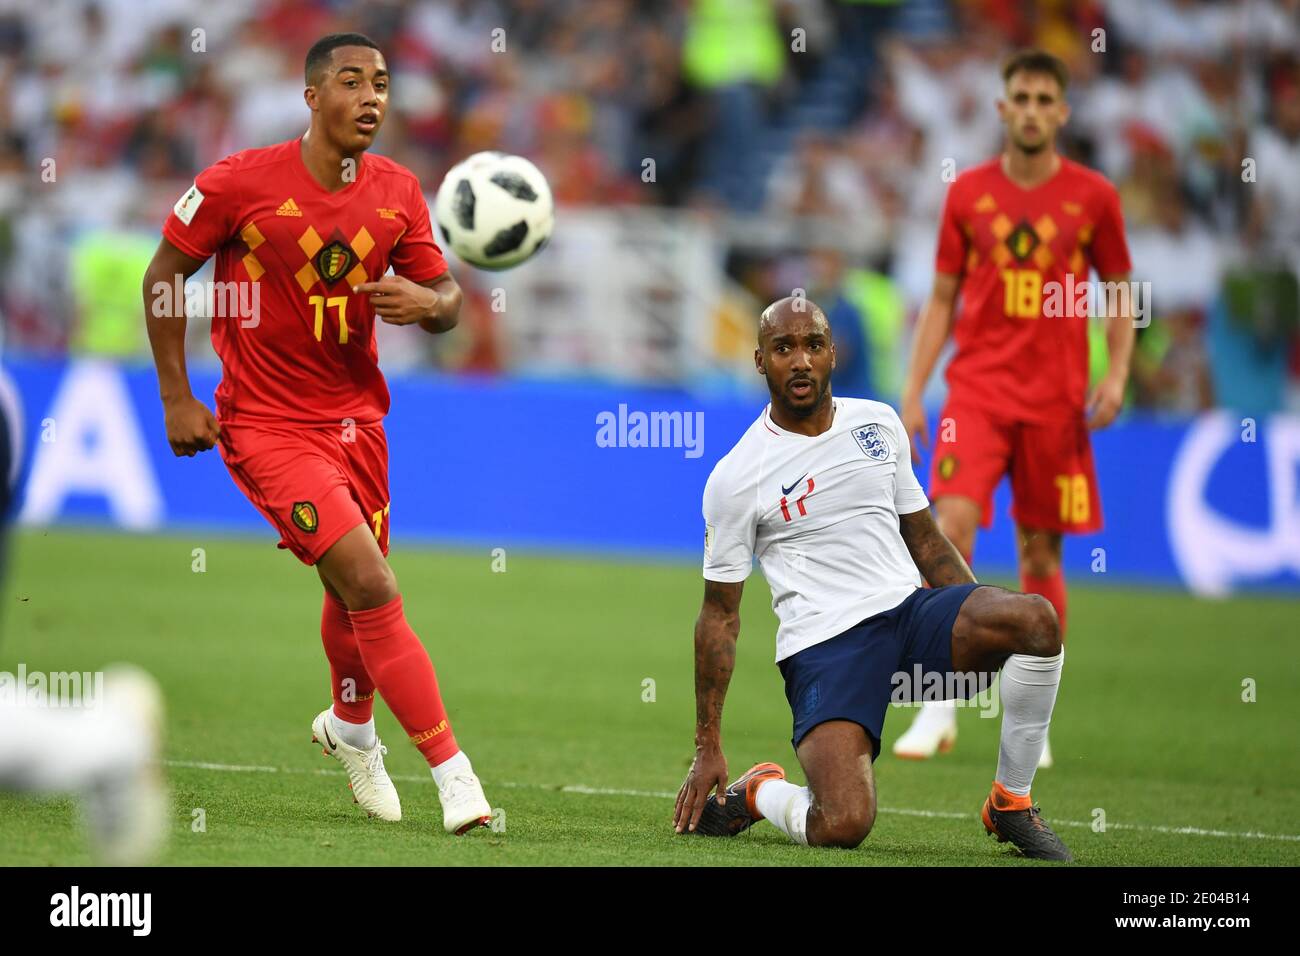 KALININGRAD, RUSSIA 28 June 2018 Yannick Carrasco (L) of Belgium & Fabian Delph of England during the 2018 FIFA World Cup Russia group G match between Stock Photo